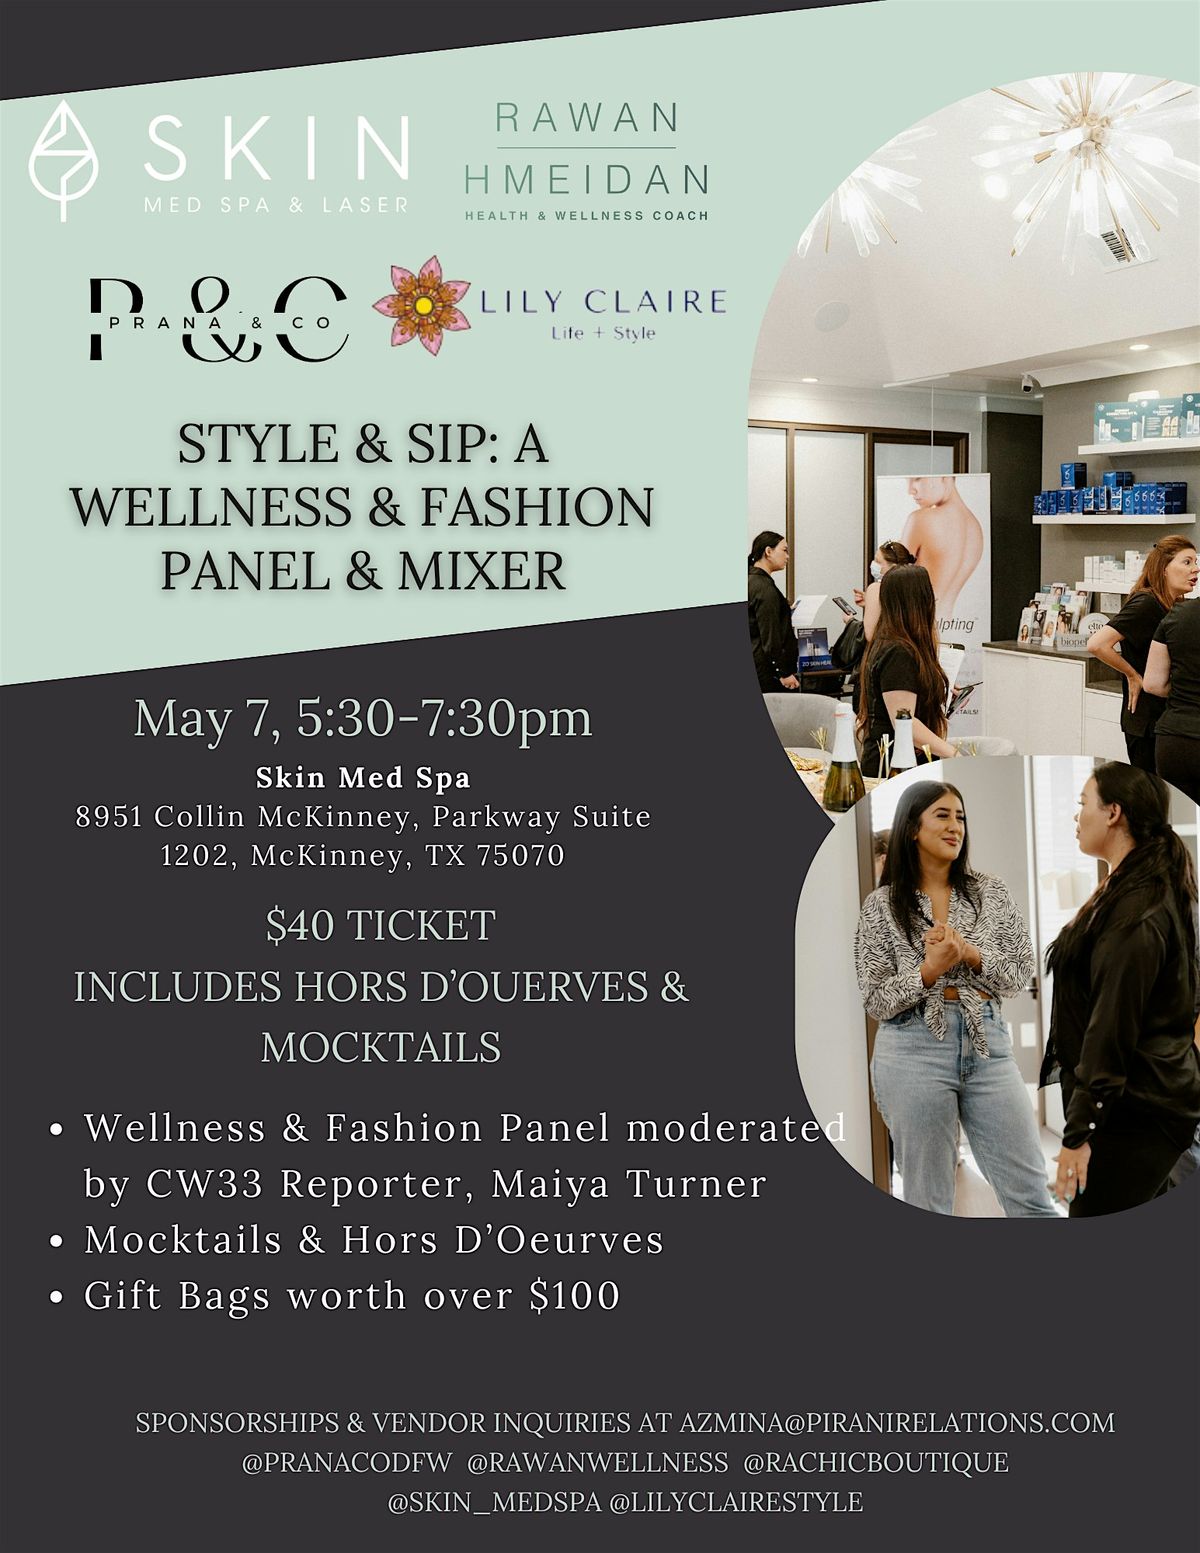 Style & Sip: A Wellness & Fashion Panel & Mixer